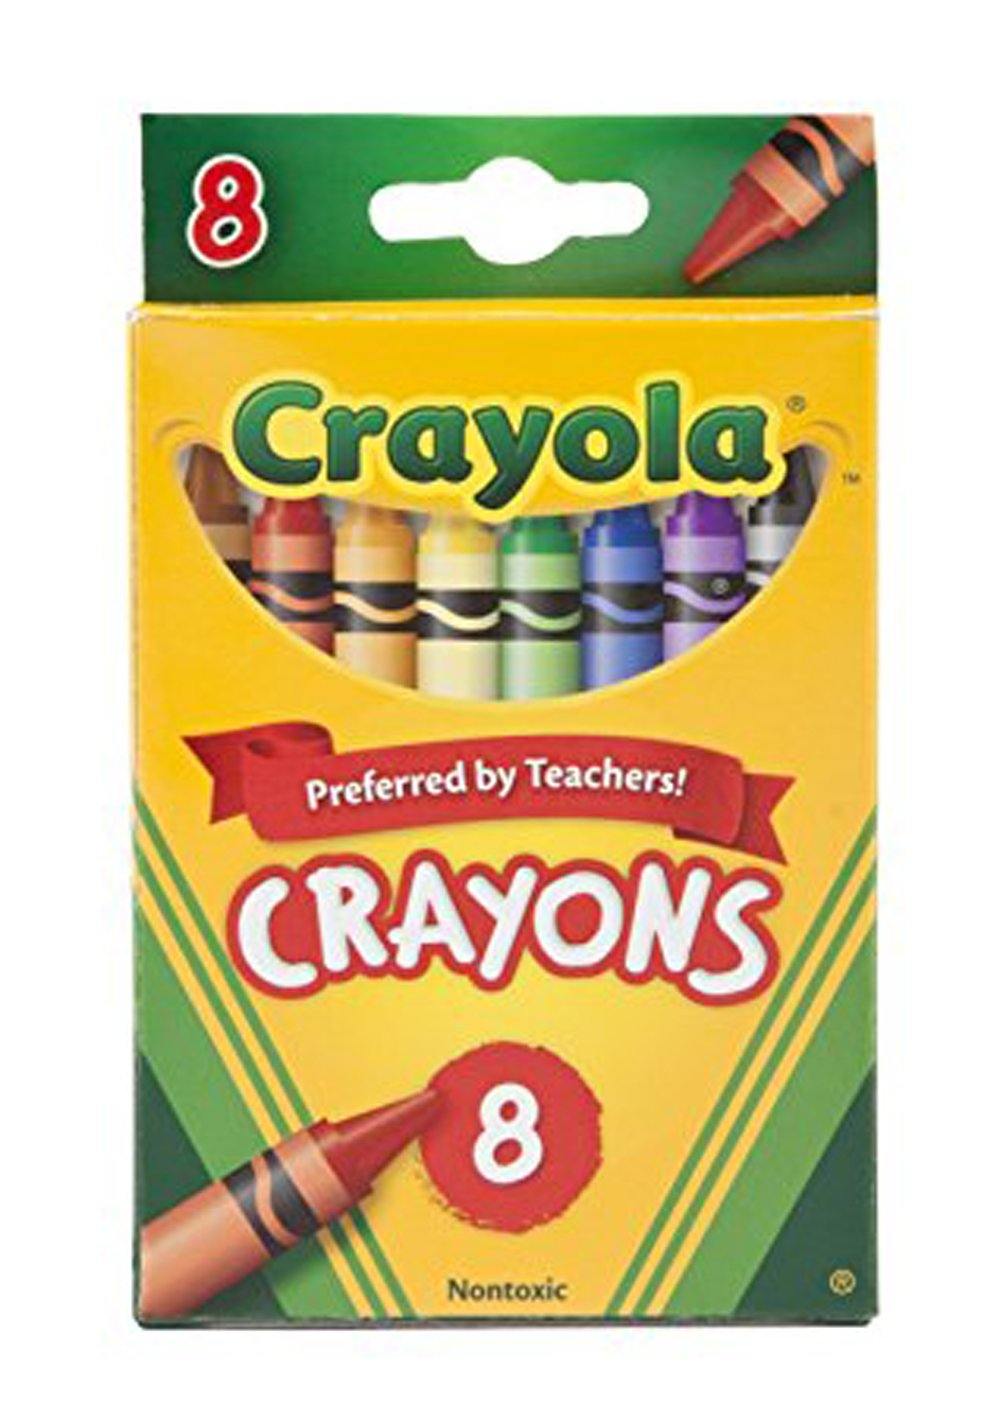 Crayons - 8 pack